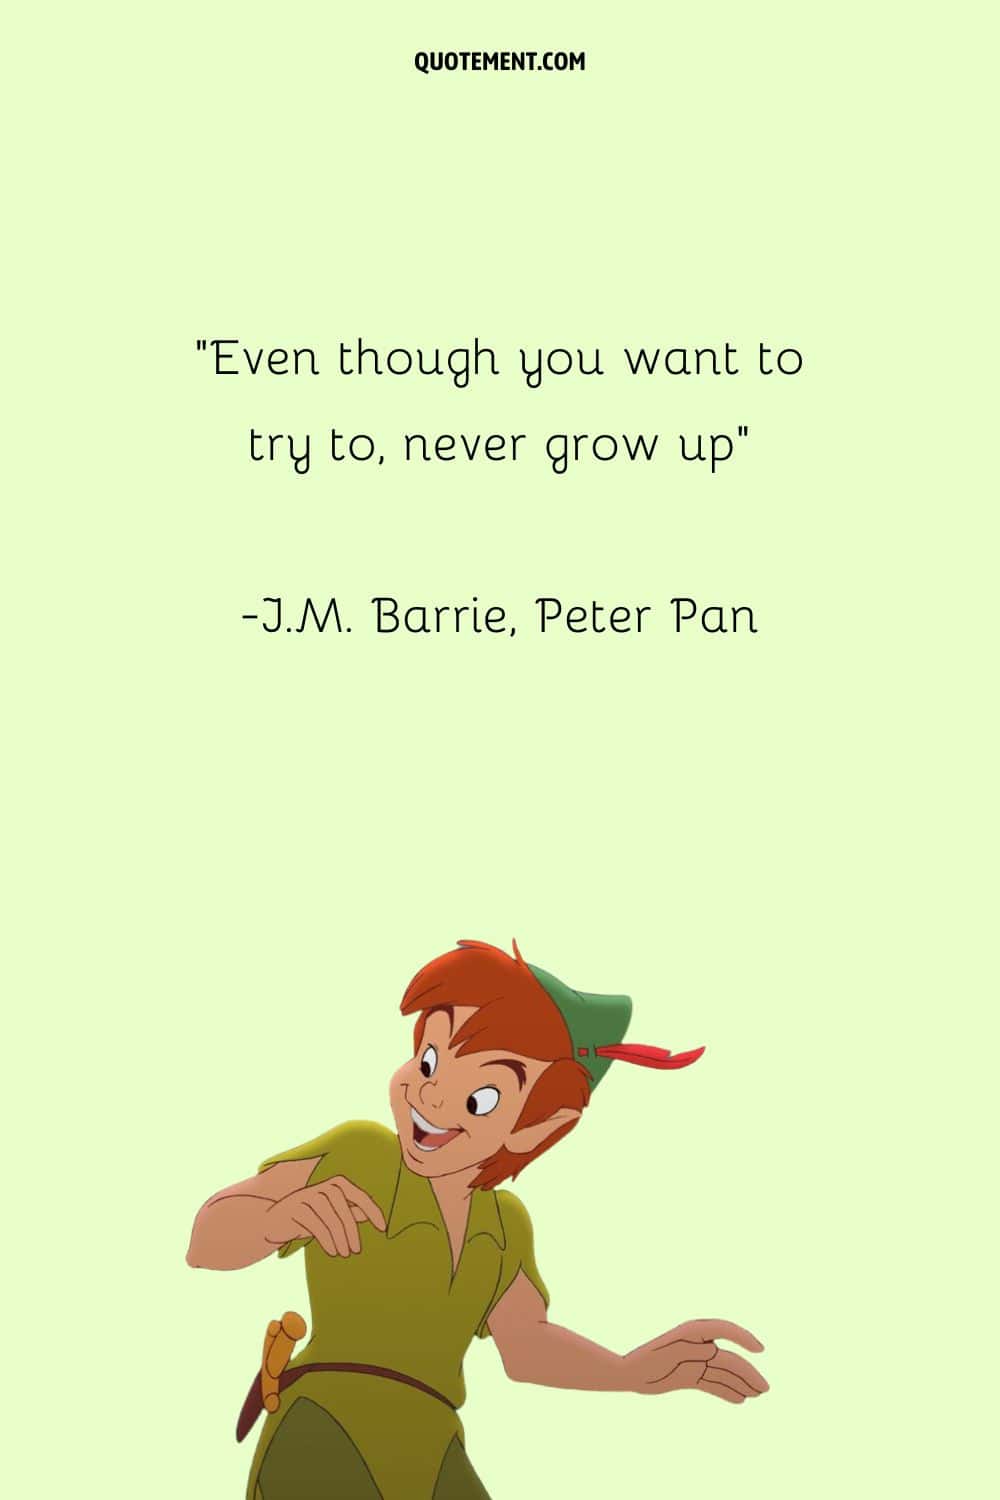 “Even though you want to try to, never grow up” ― J.M. Barrie, Peter Pan